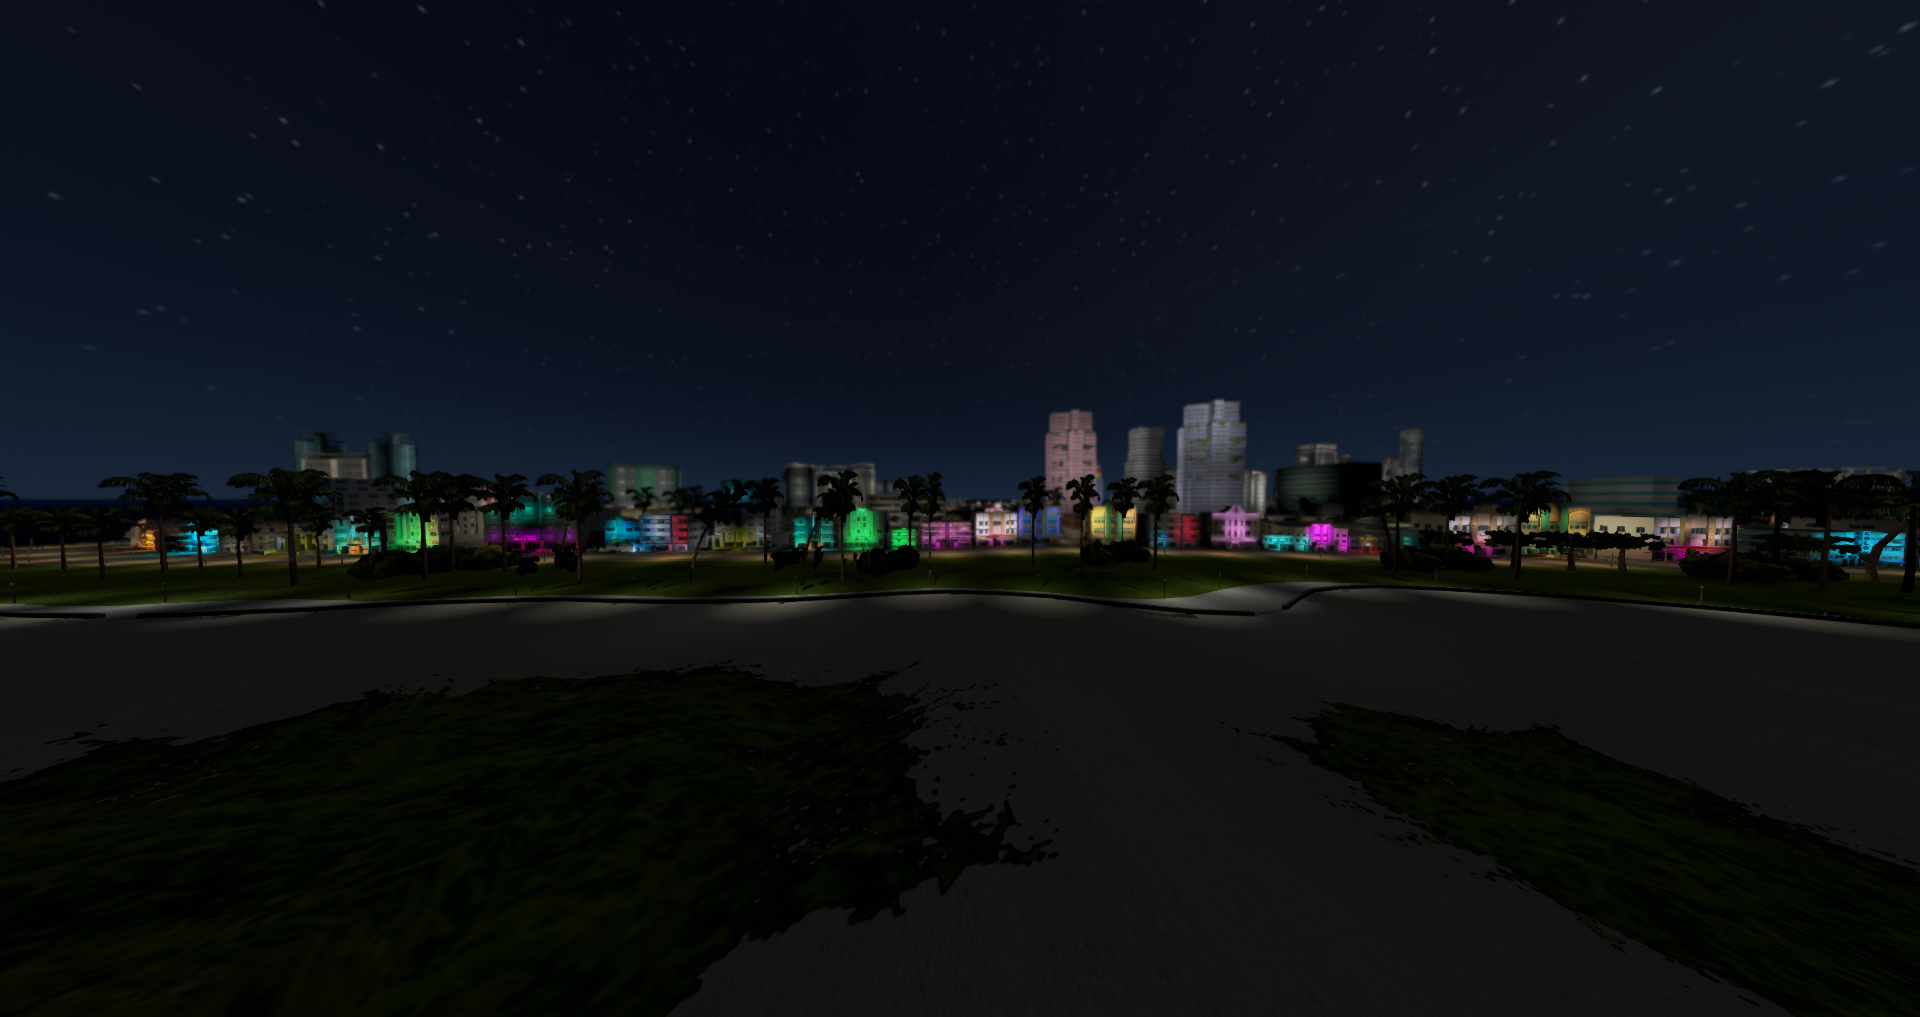 Released - Vice City (GTA VC) - 2.1 (The Full Night Lights Update) | BeamNG